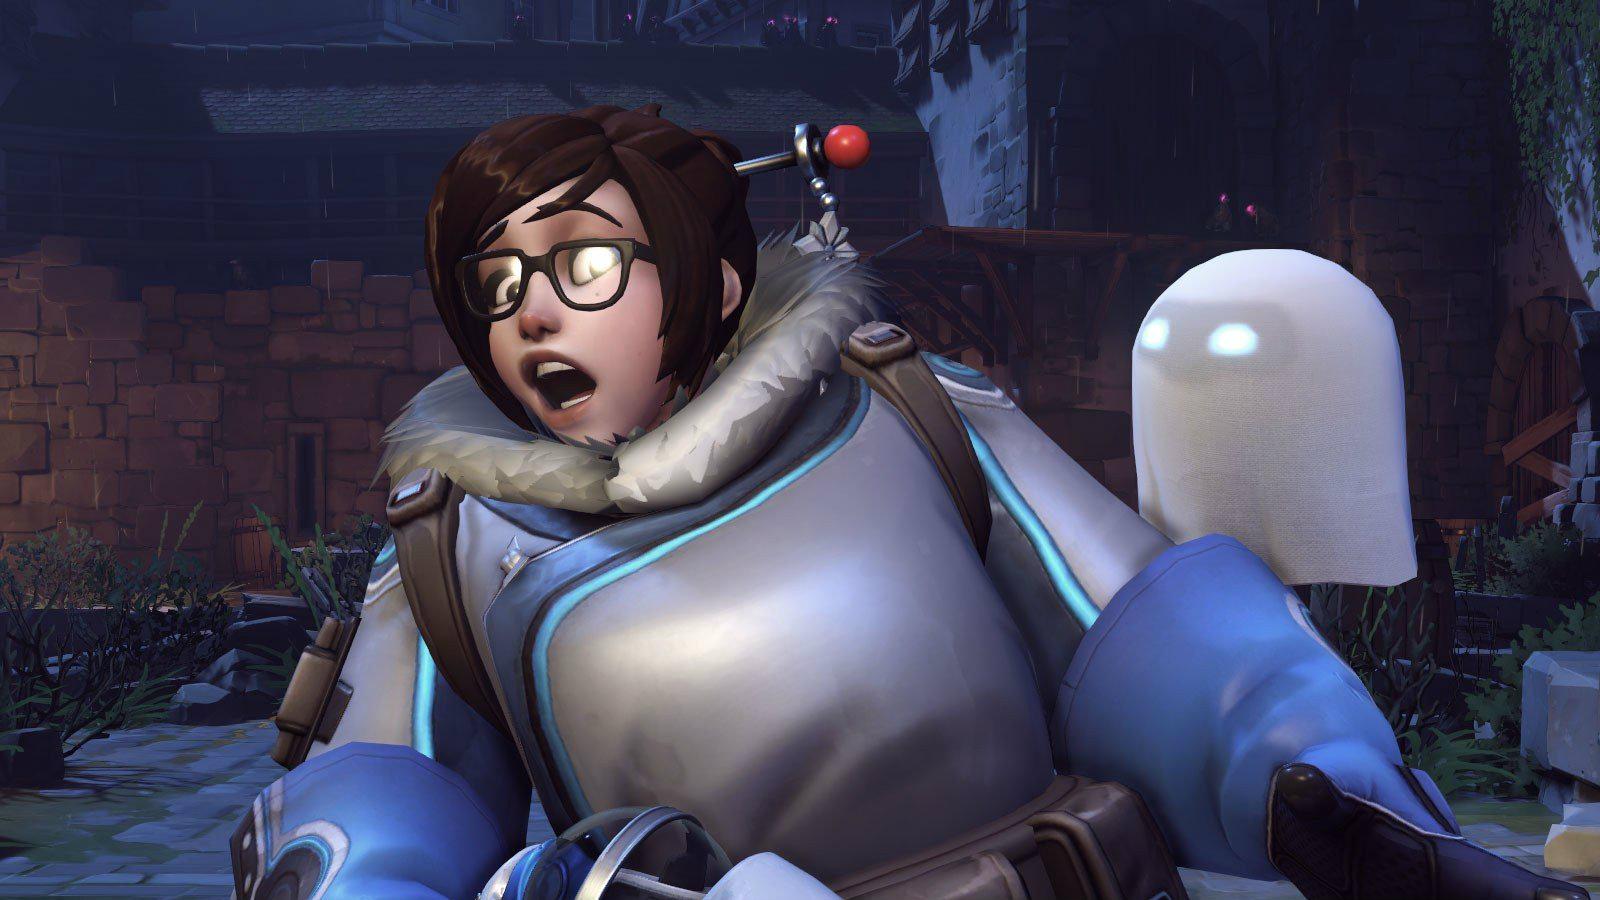 Mei is scared of ghosts